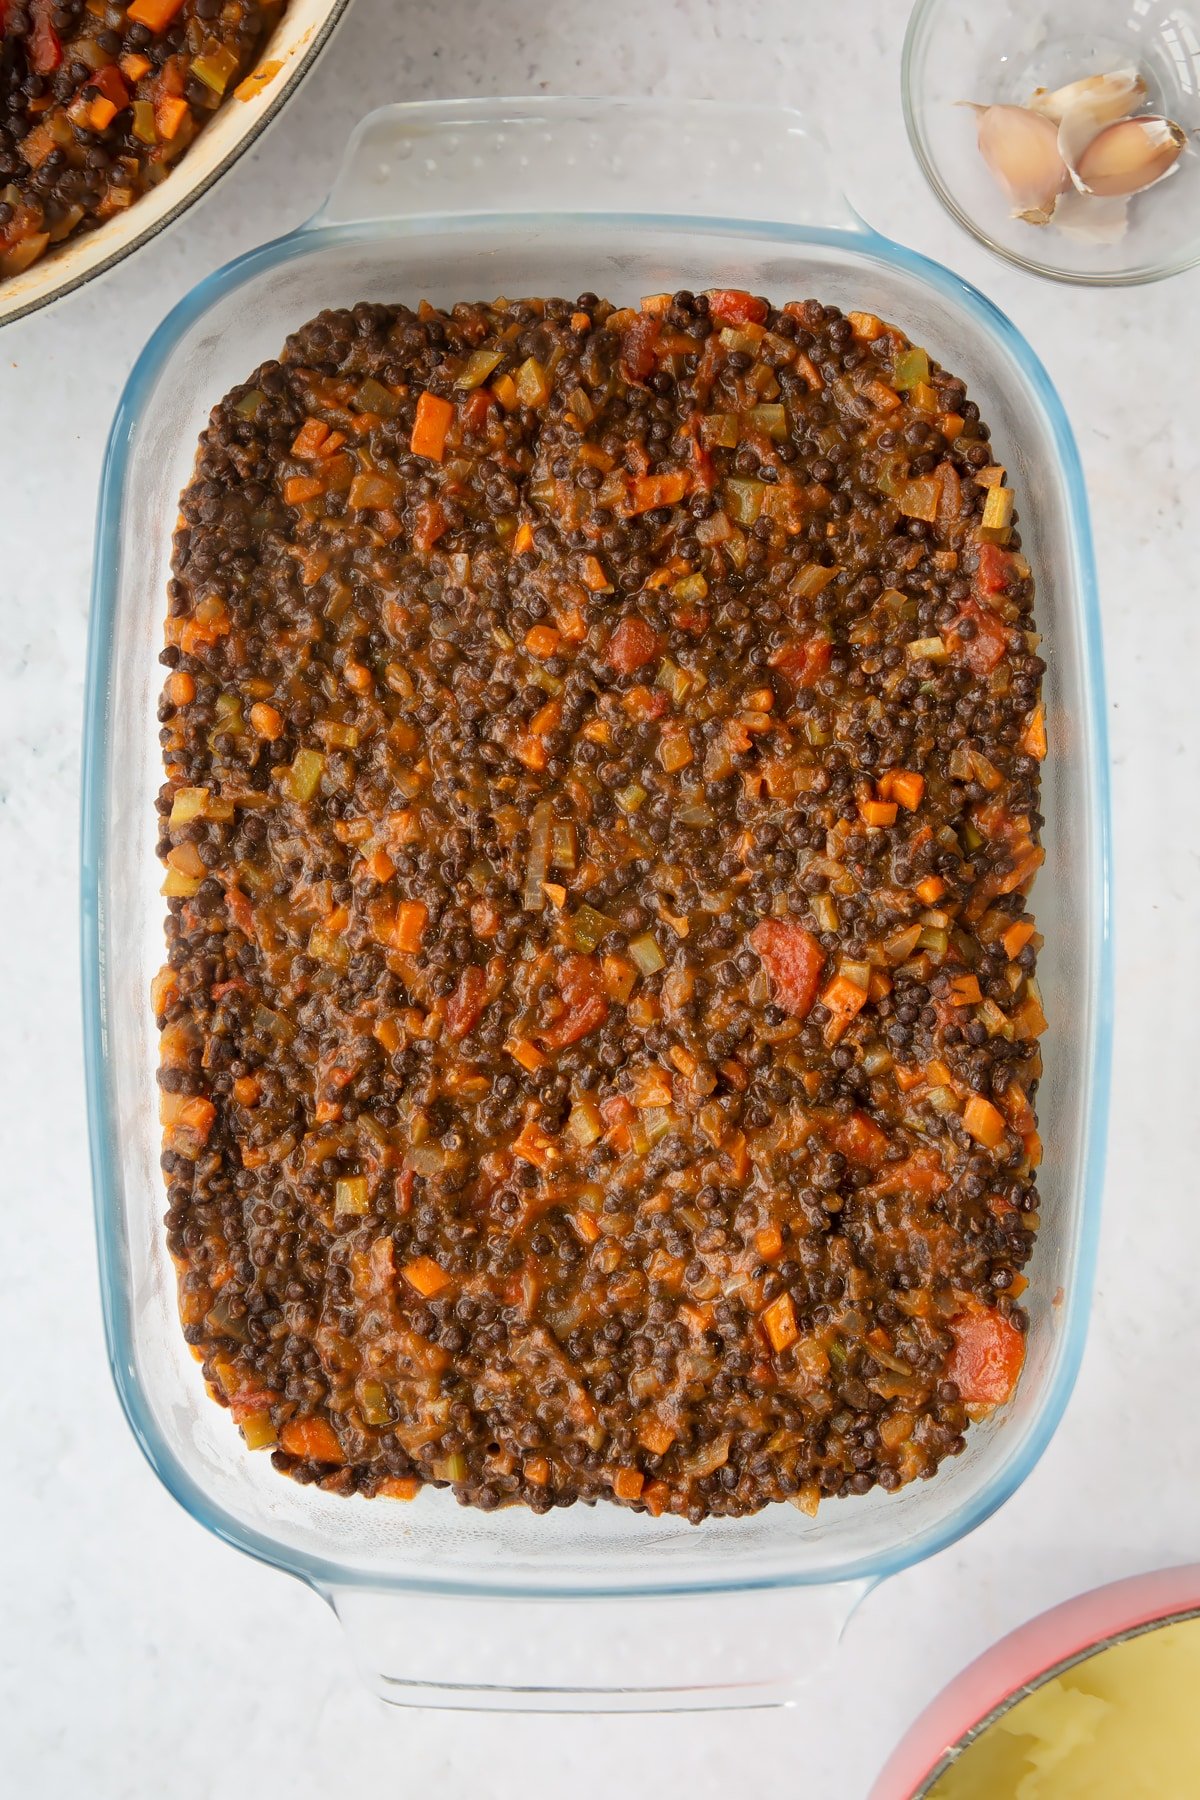 a overhead view of a large clear casserole dish filled with vegetable and brown lentil filling.